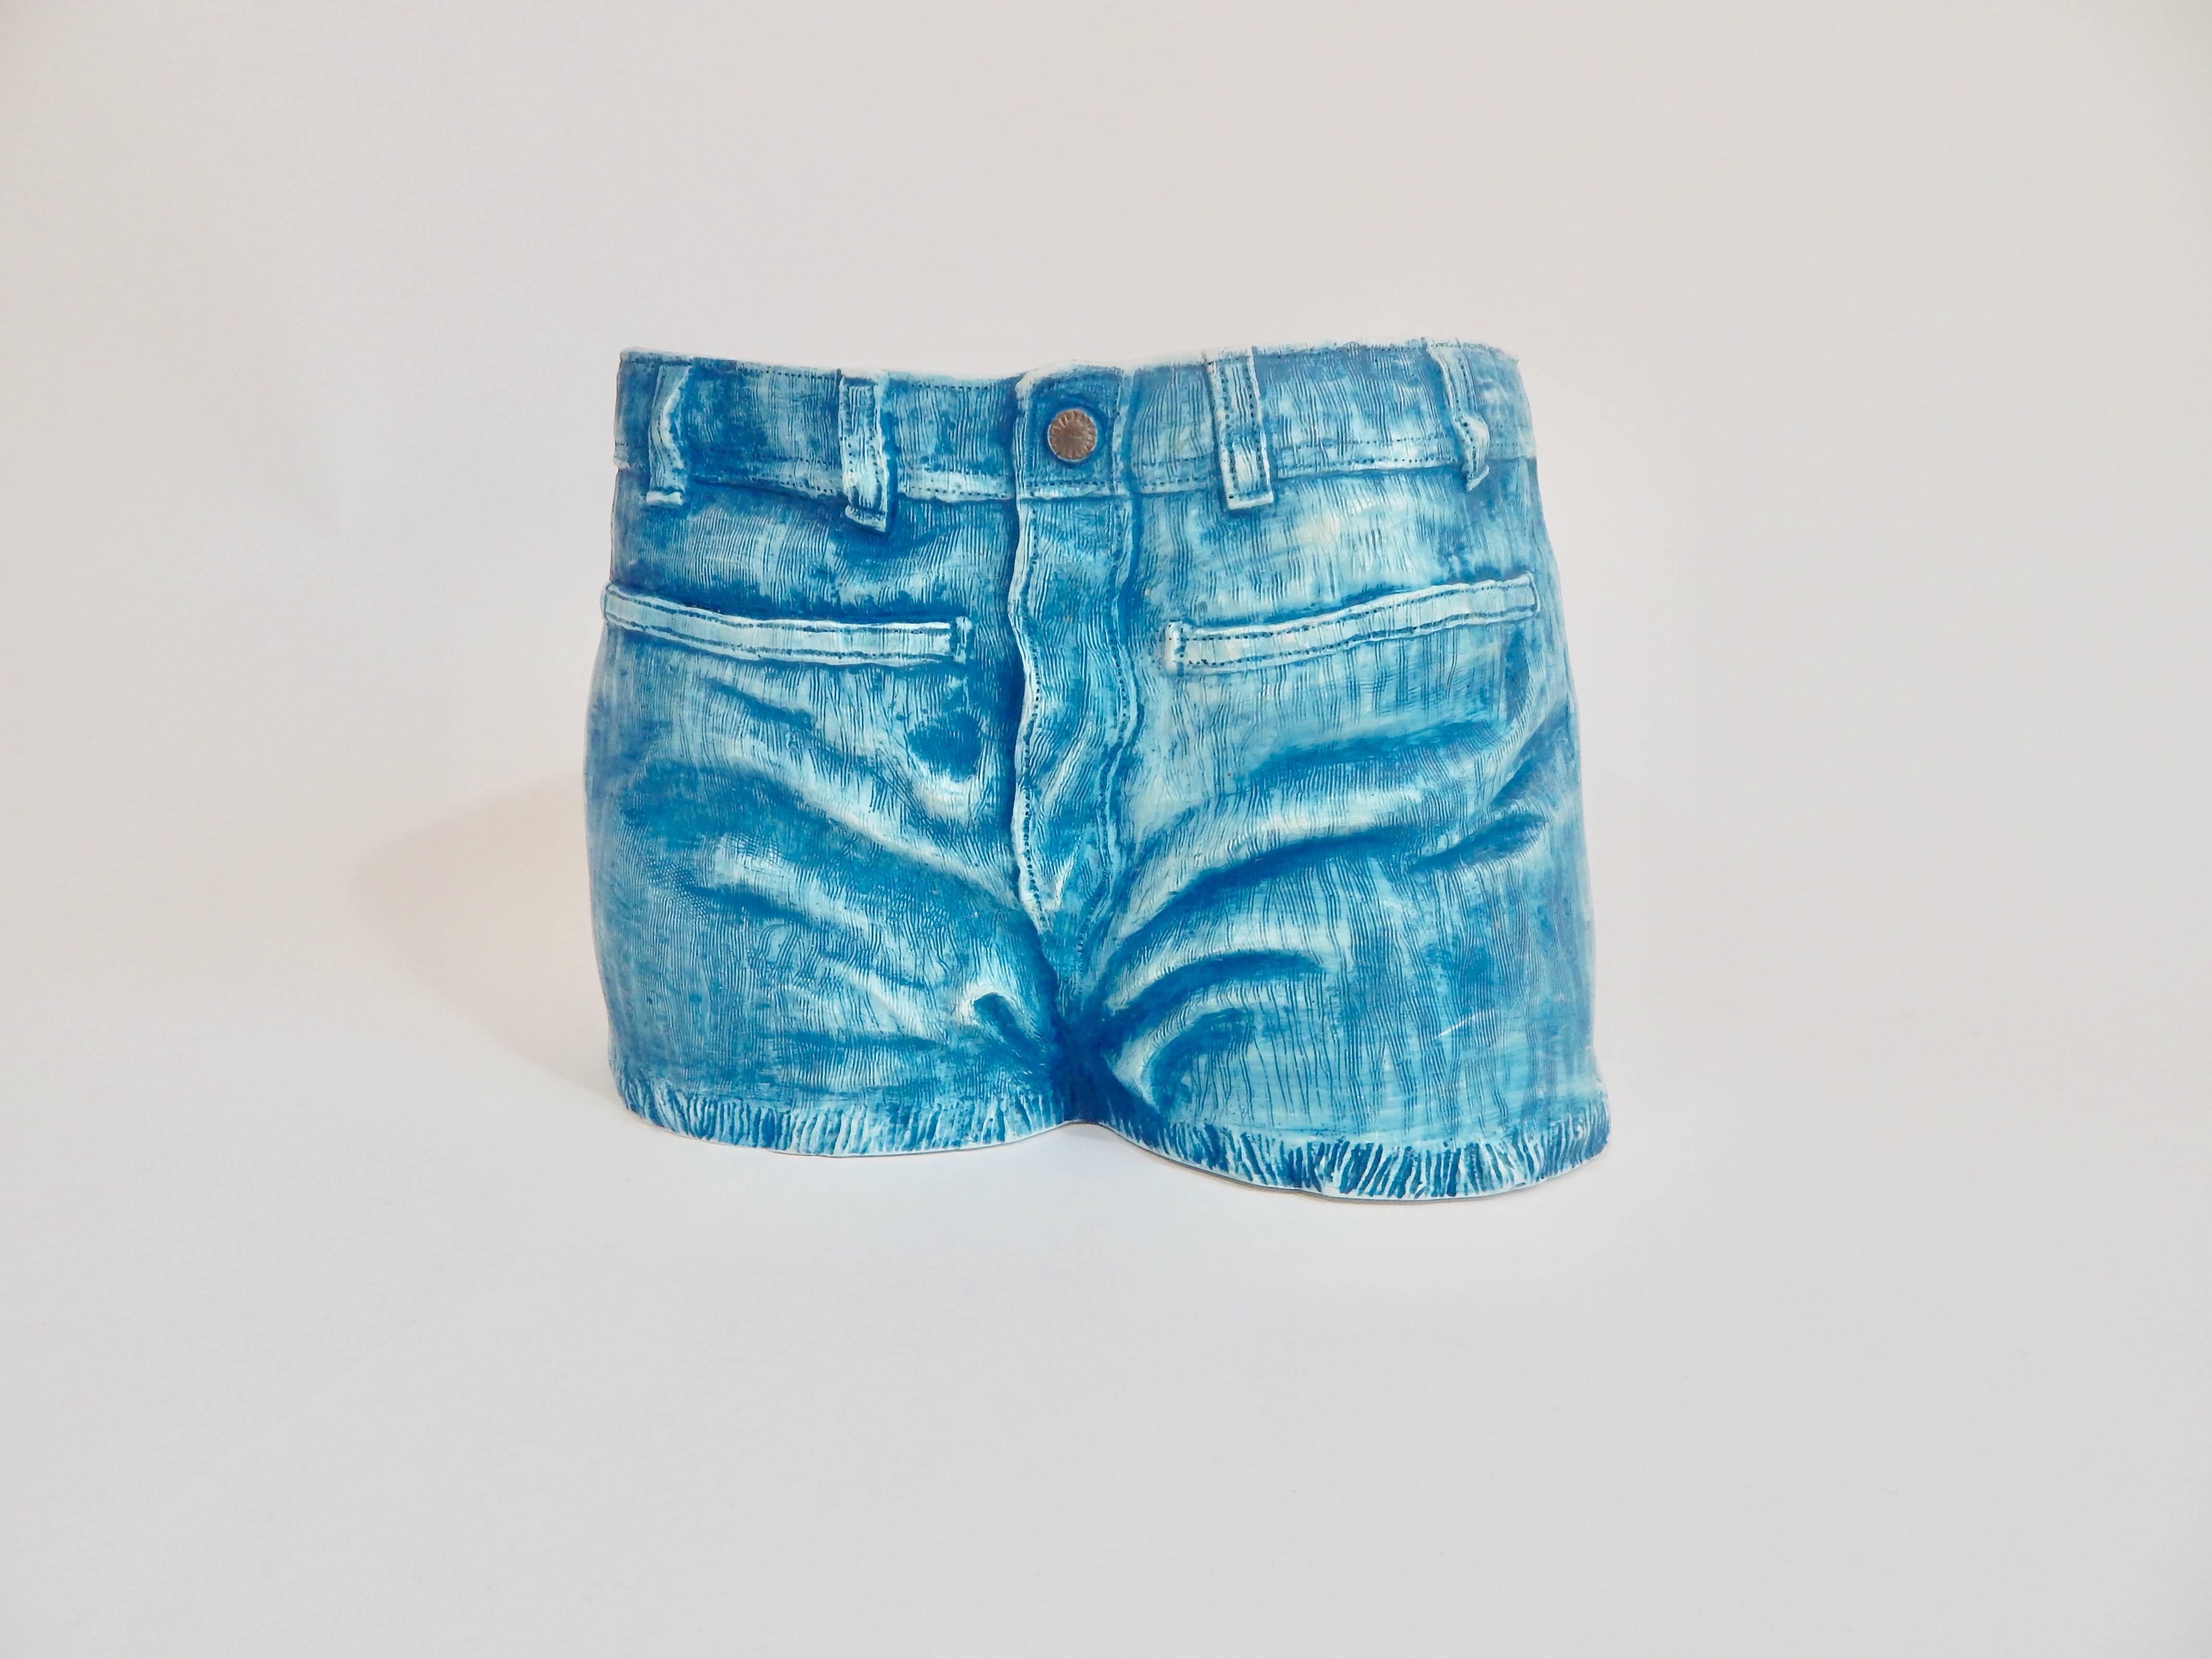 Midcentury late 1960s or early 1970s. Soft plastic pot or bucket molded into the shape Denim Jeans cut offs with Fringe. Made on 5th Ave NYC by Kraftkare. Stamped on bottom. Fun pop art piece.